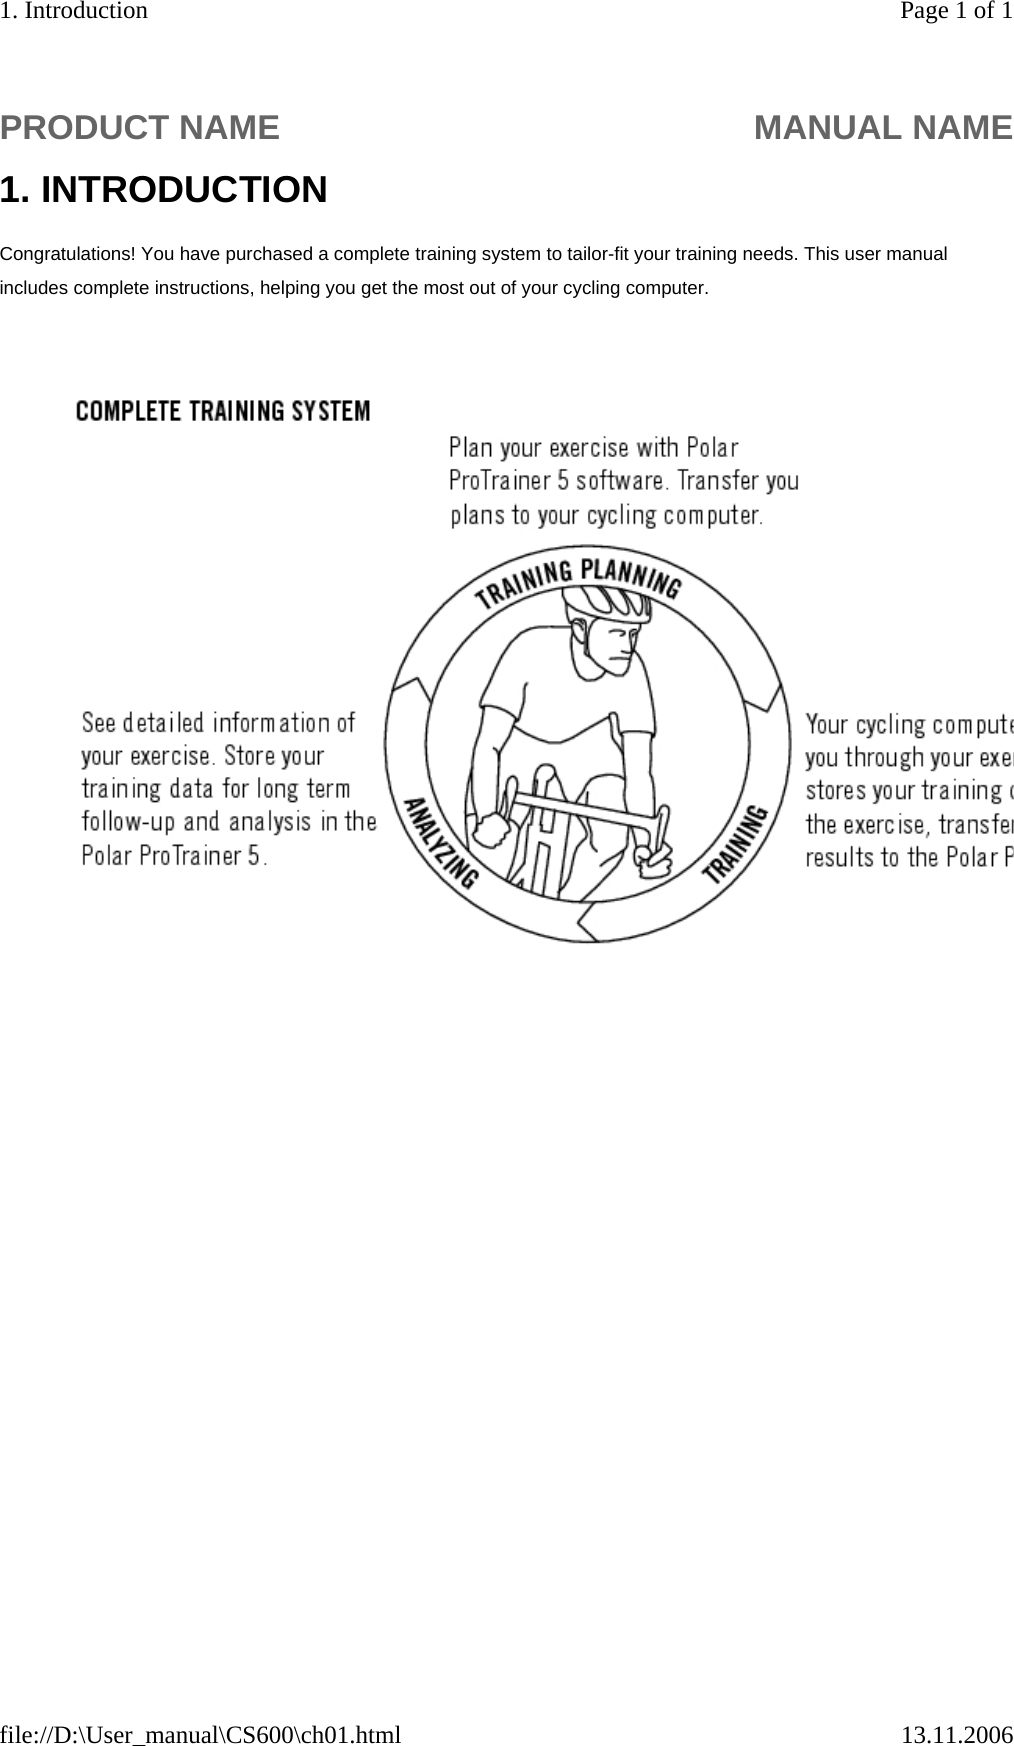   1. INTRODUCTION Congratulations! You have purchased a complete training system to tailor-fit your training needs. This user manual includes complete instructions, helping you get the most out of your cycling computer.   PRODUCT NAME MANUAL NAMEPage 1 of 11. Introduction13.11.2006file://D:\User_manual\CS600\ch01.html